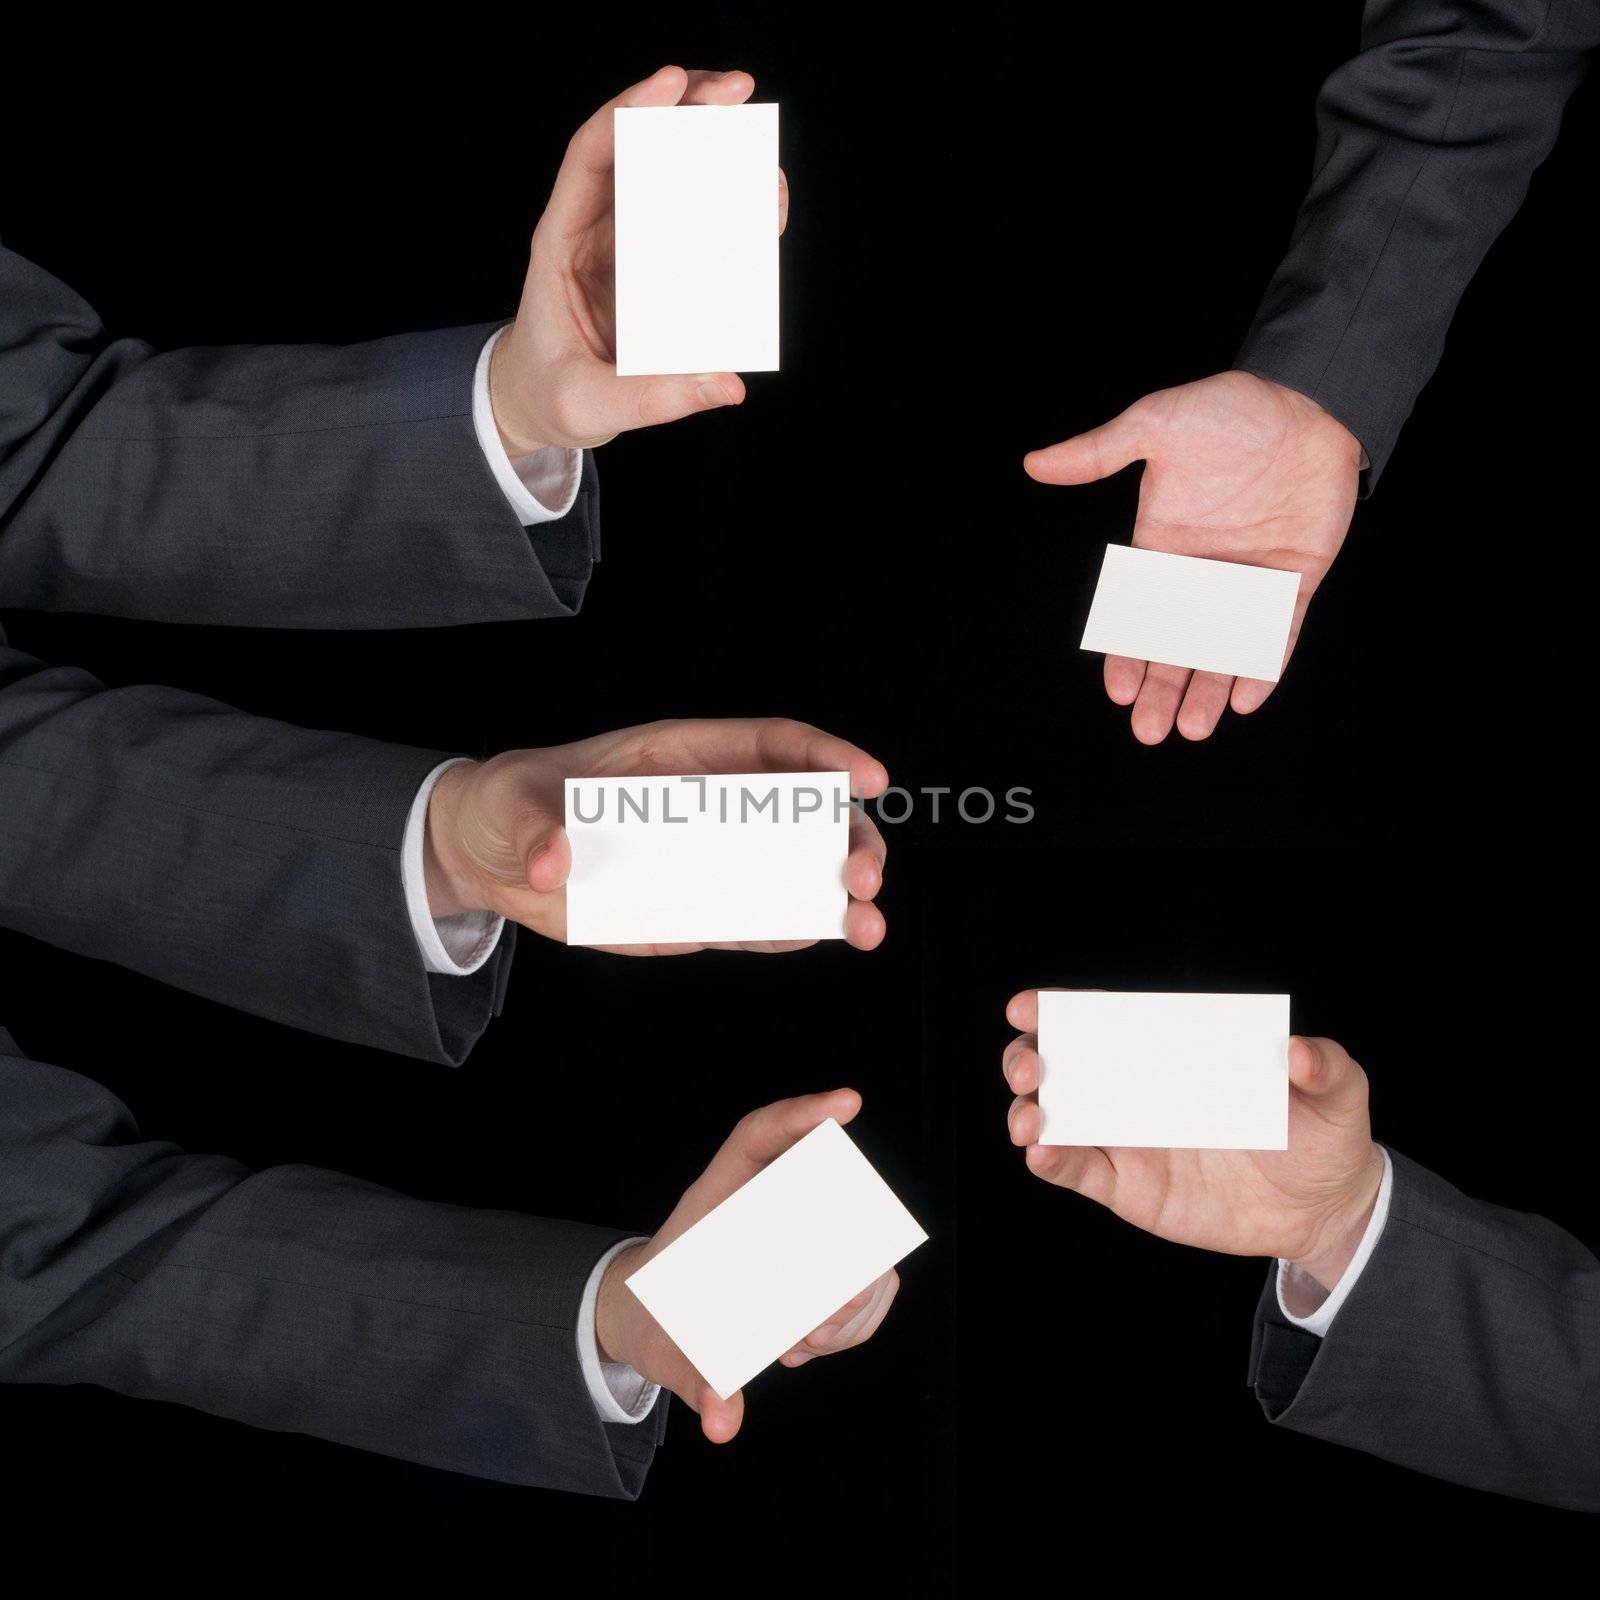 Hands hold business cards collage on black background